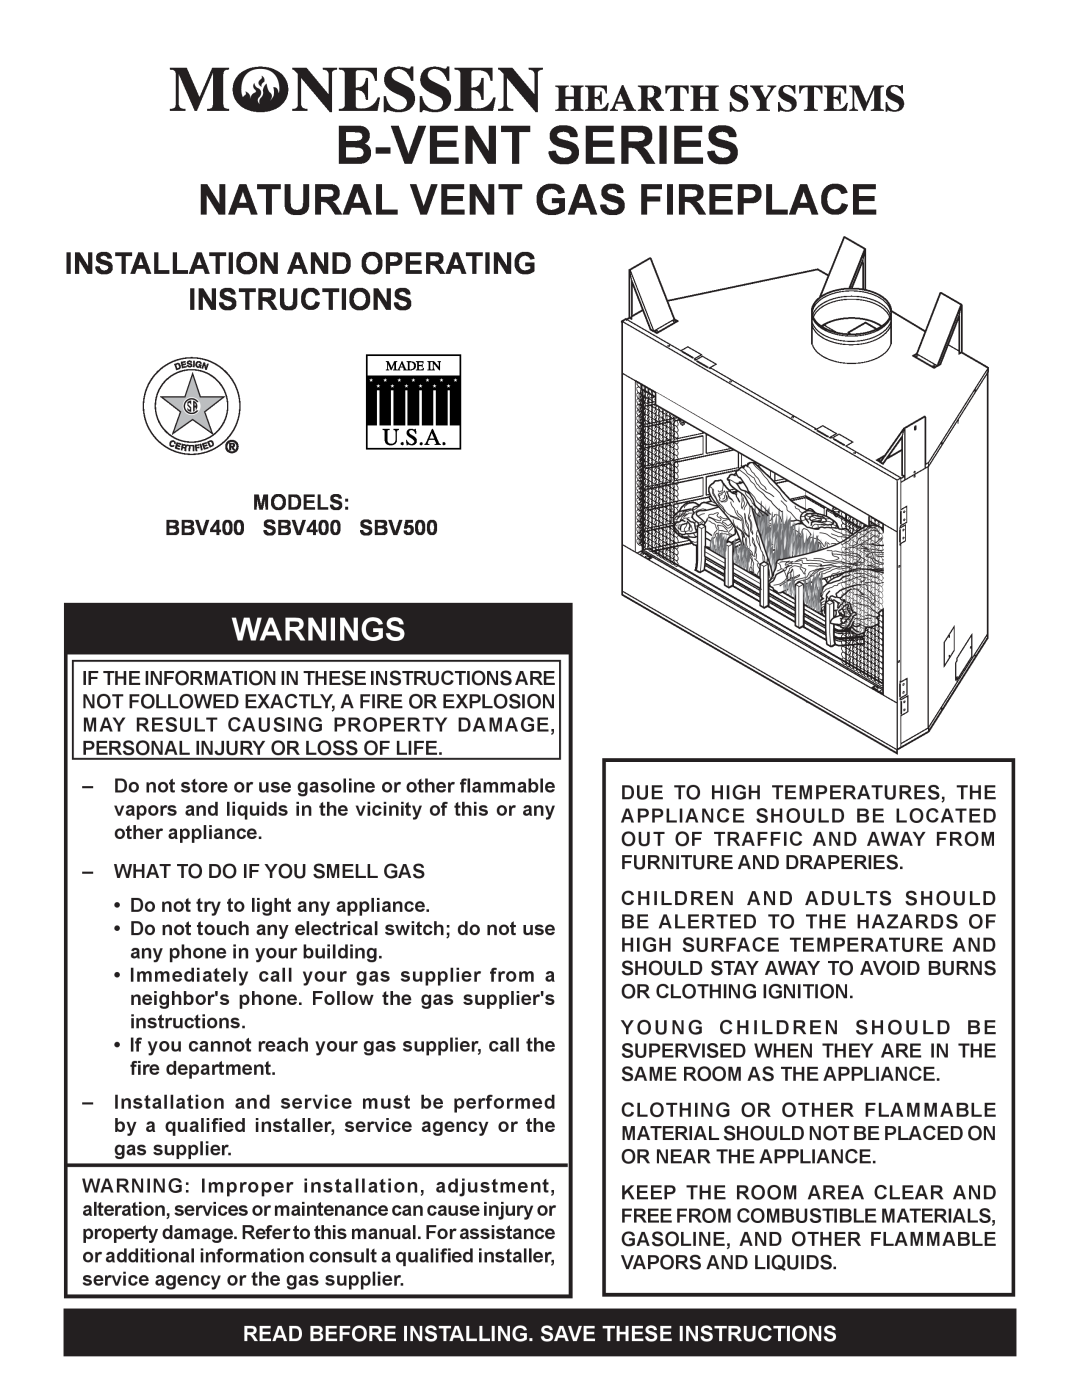 Monessen Hearth SBV500 manual Installation And Operating Instructions, Read Before Installing. Save These Instructions 